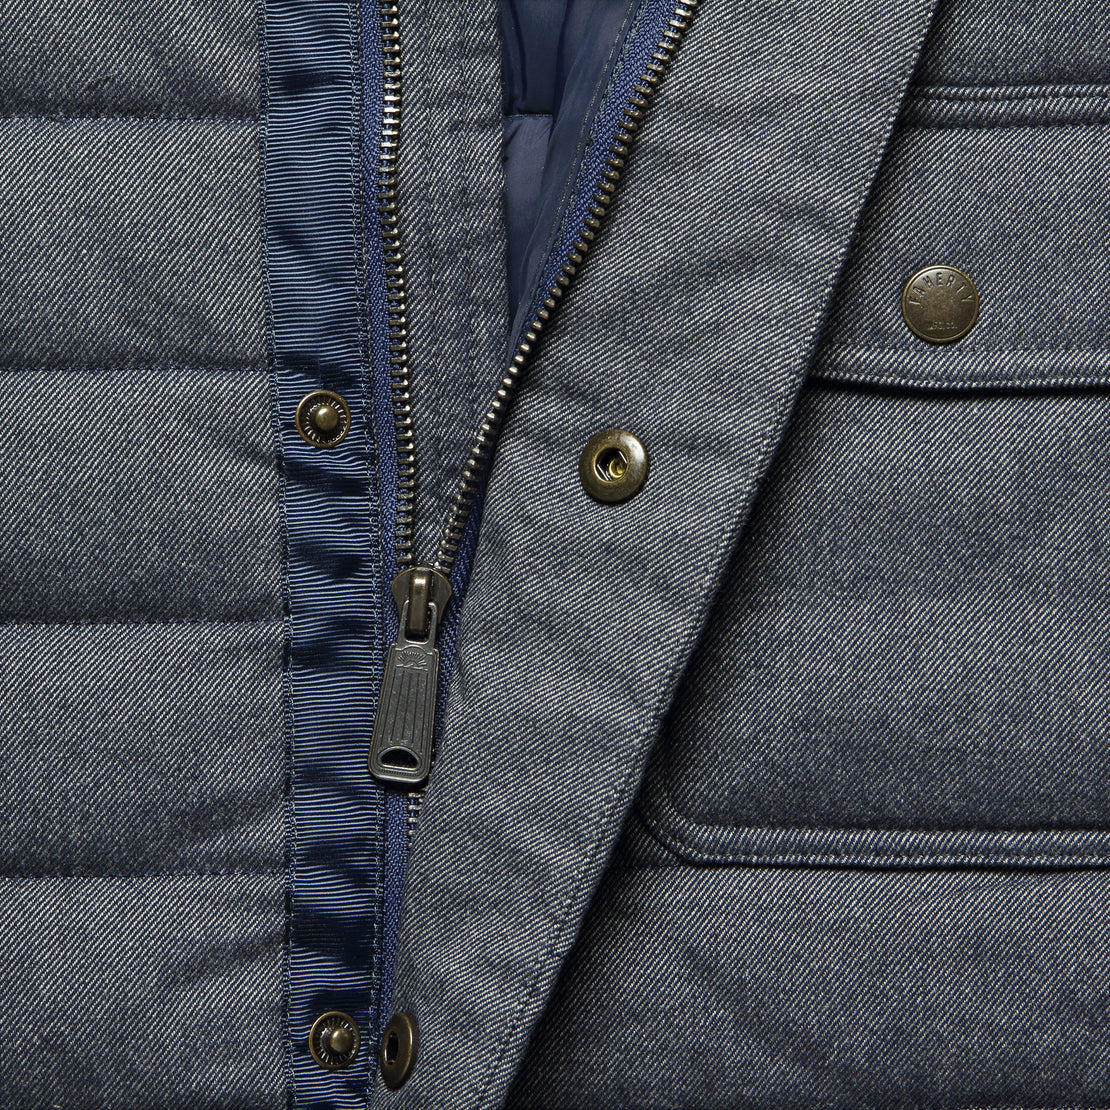 Teton Valley Jacket - Slate - Faherty - STAG Provisions - Outerwear - Coat / Jacket